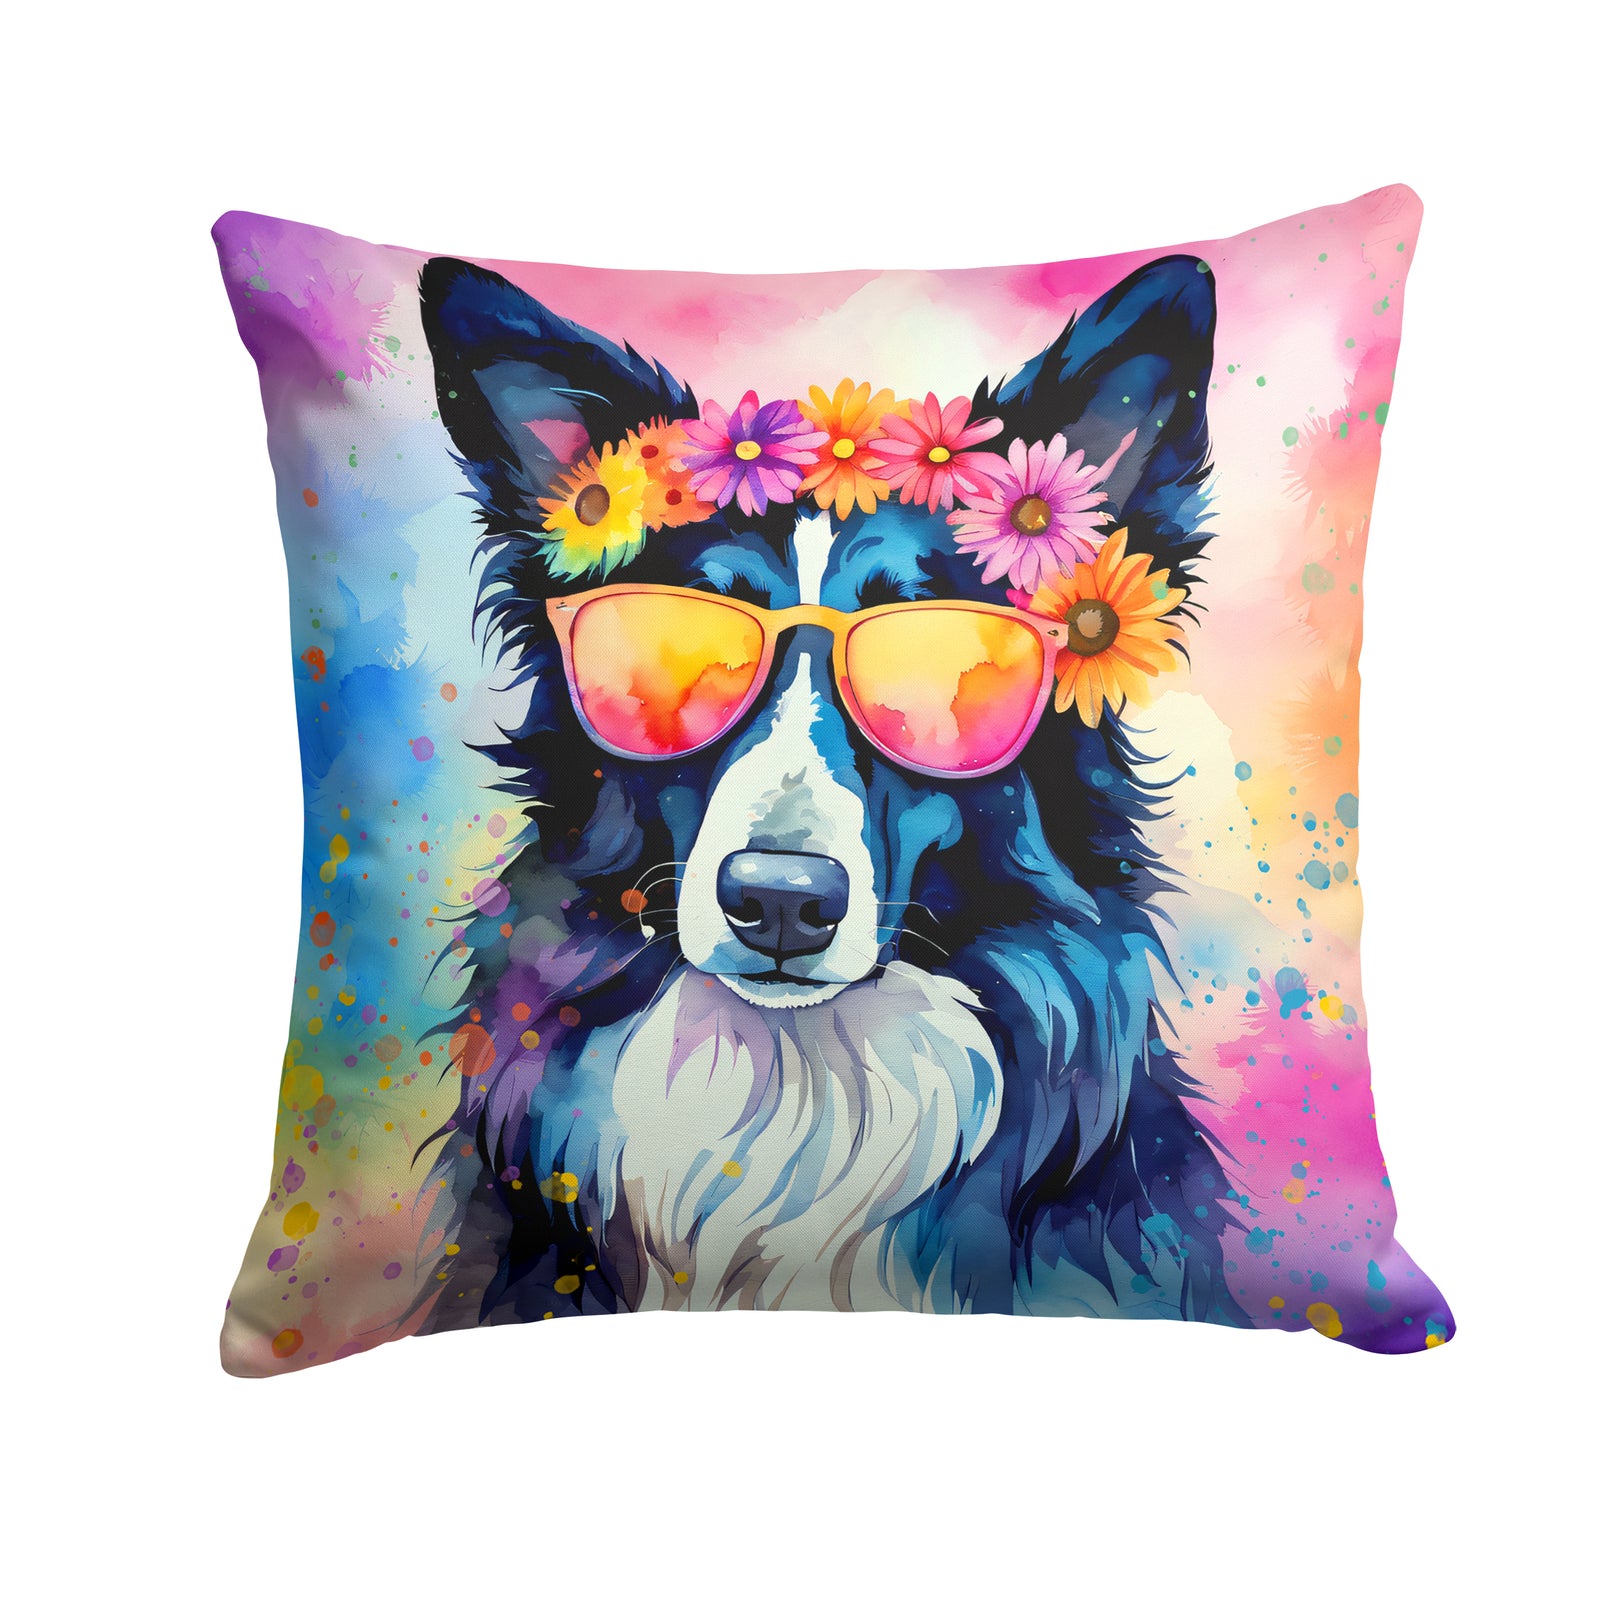 Buy this Border Collie Hippie Dawg Fabric Decorative Pillow